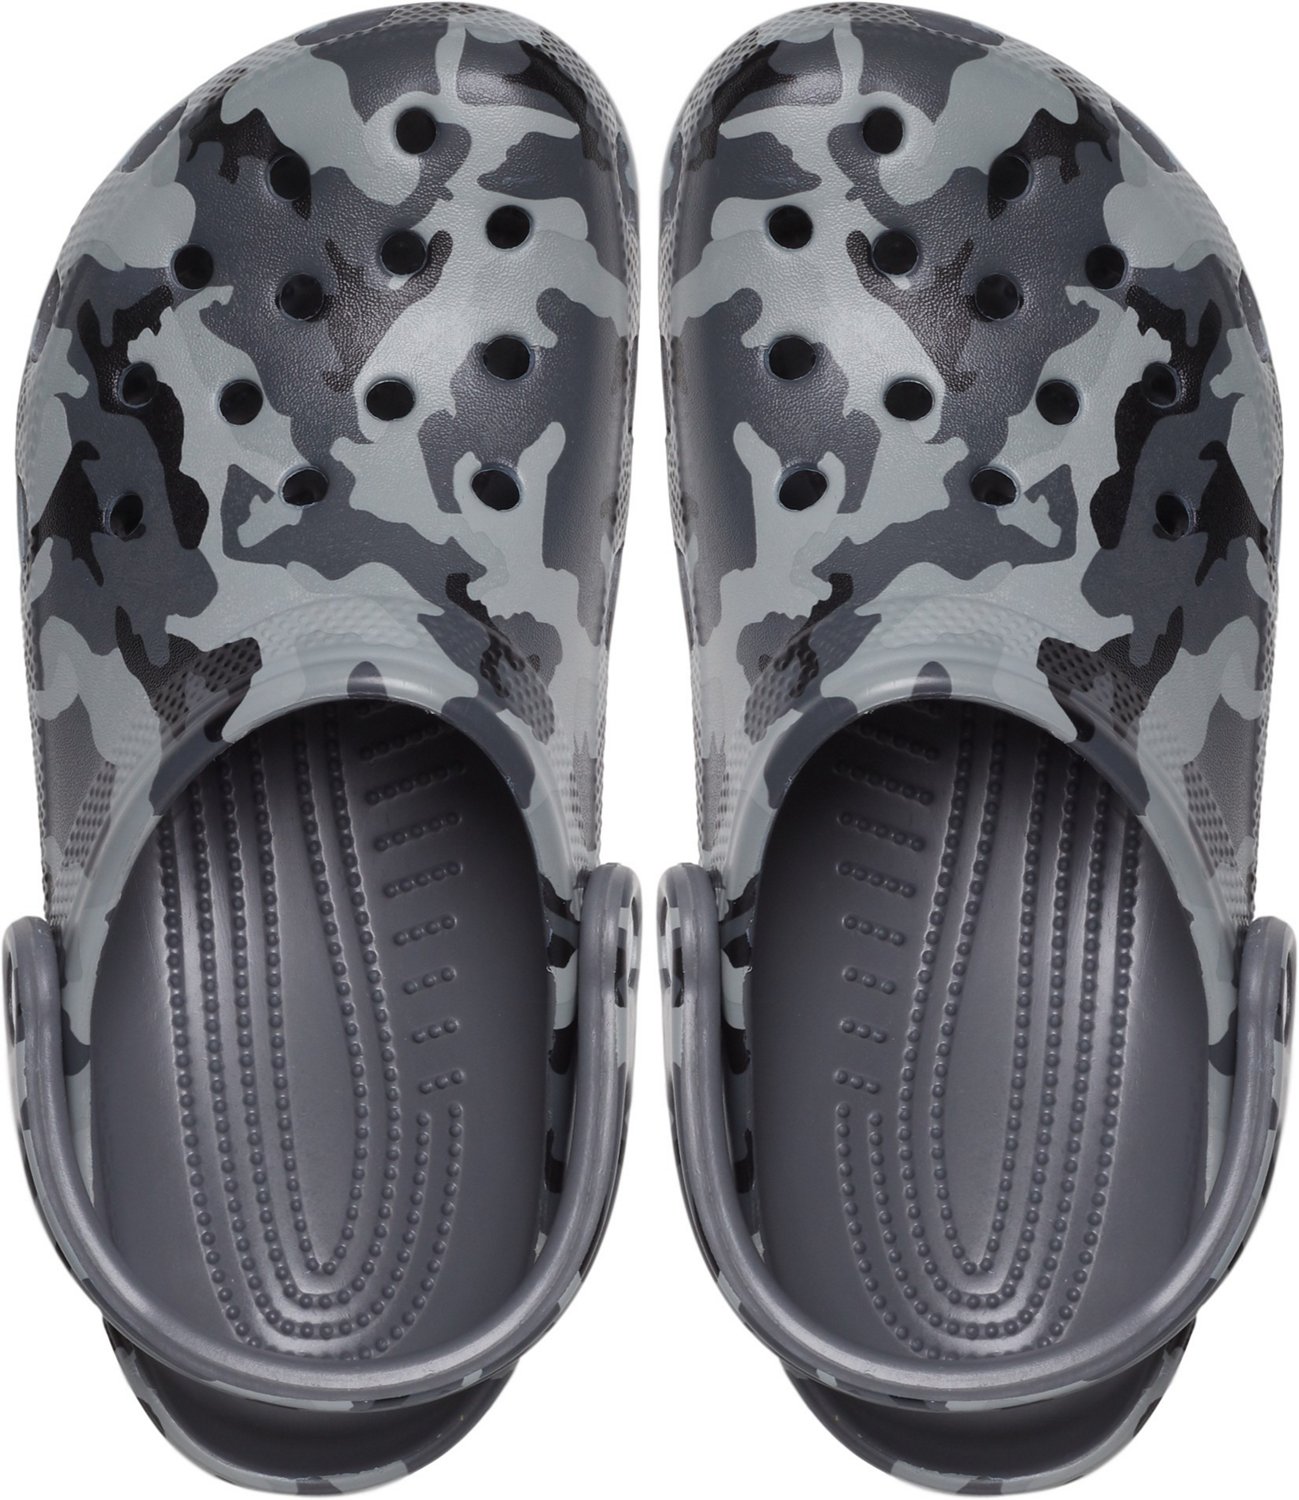 Crocs Classic Printed Camo Clogs | Free Shipping at Academy